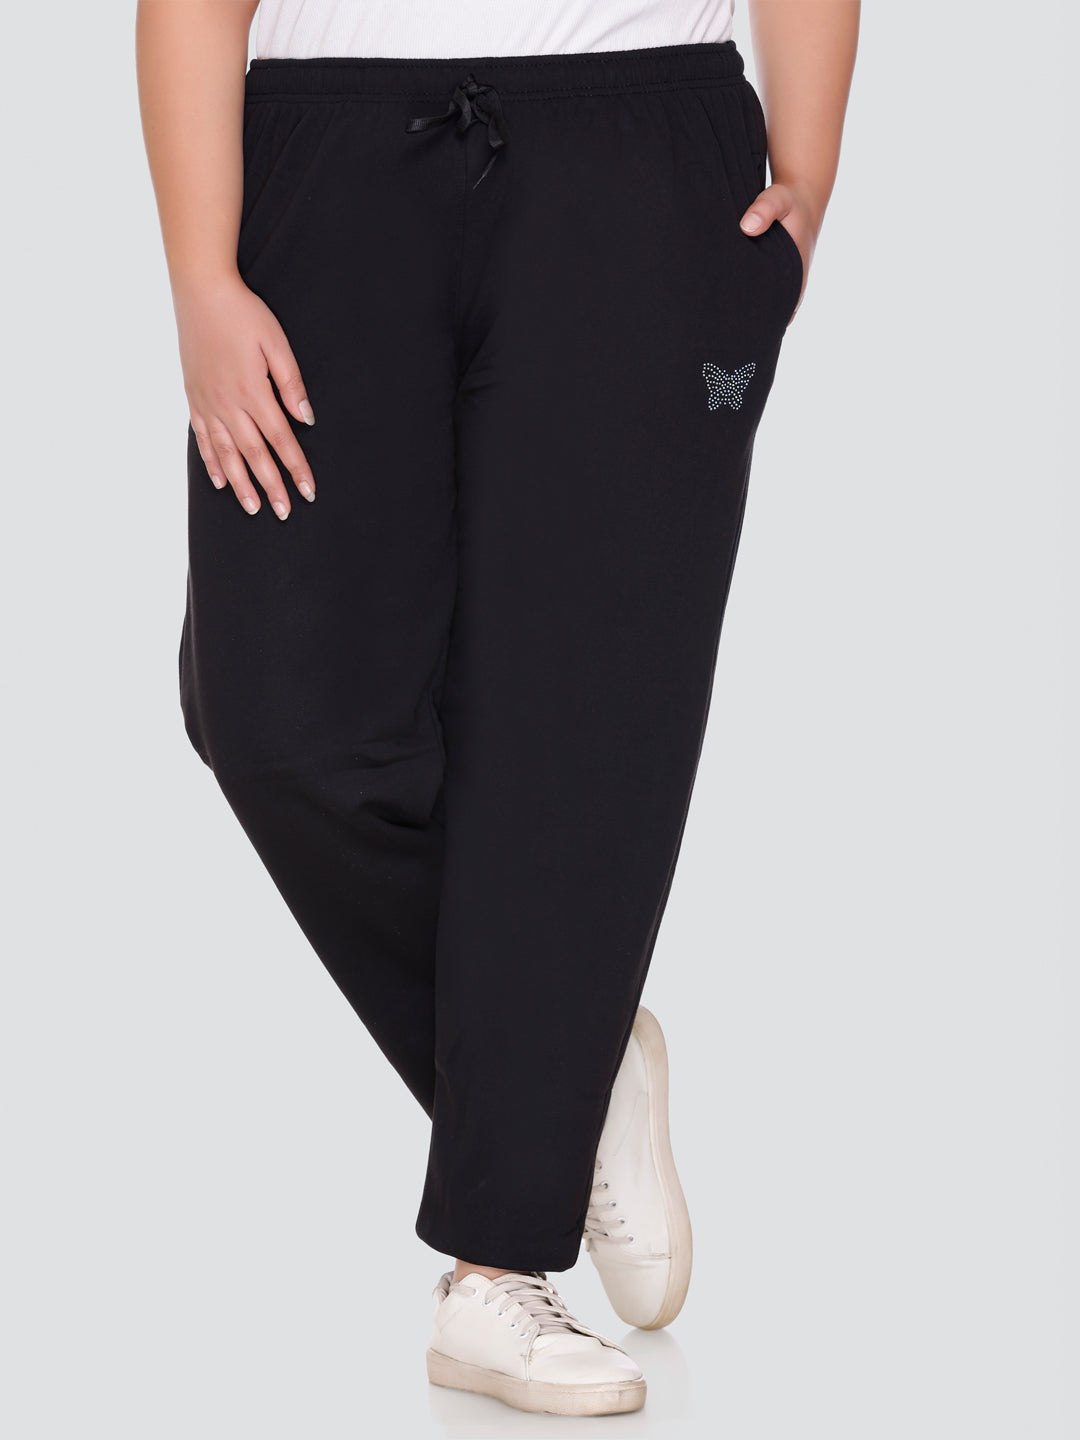 Buy Sweatpants for Women Online at Best Prices in India